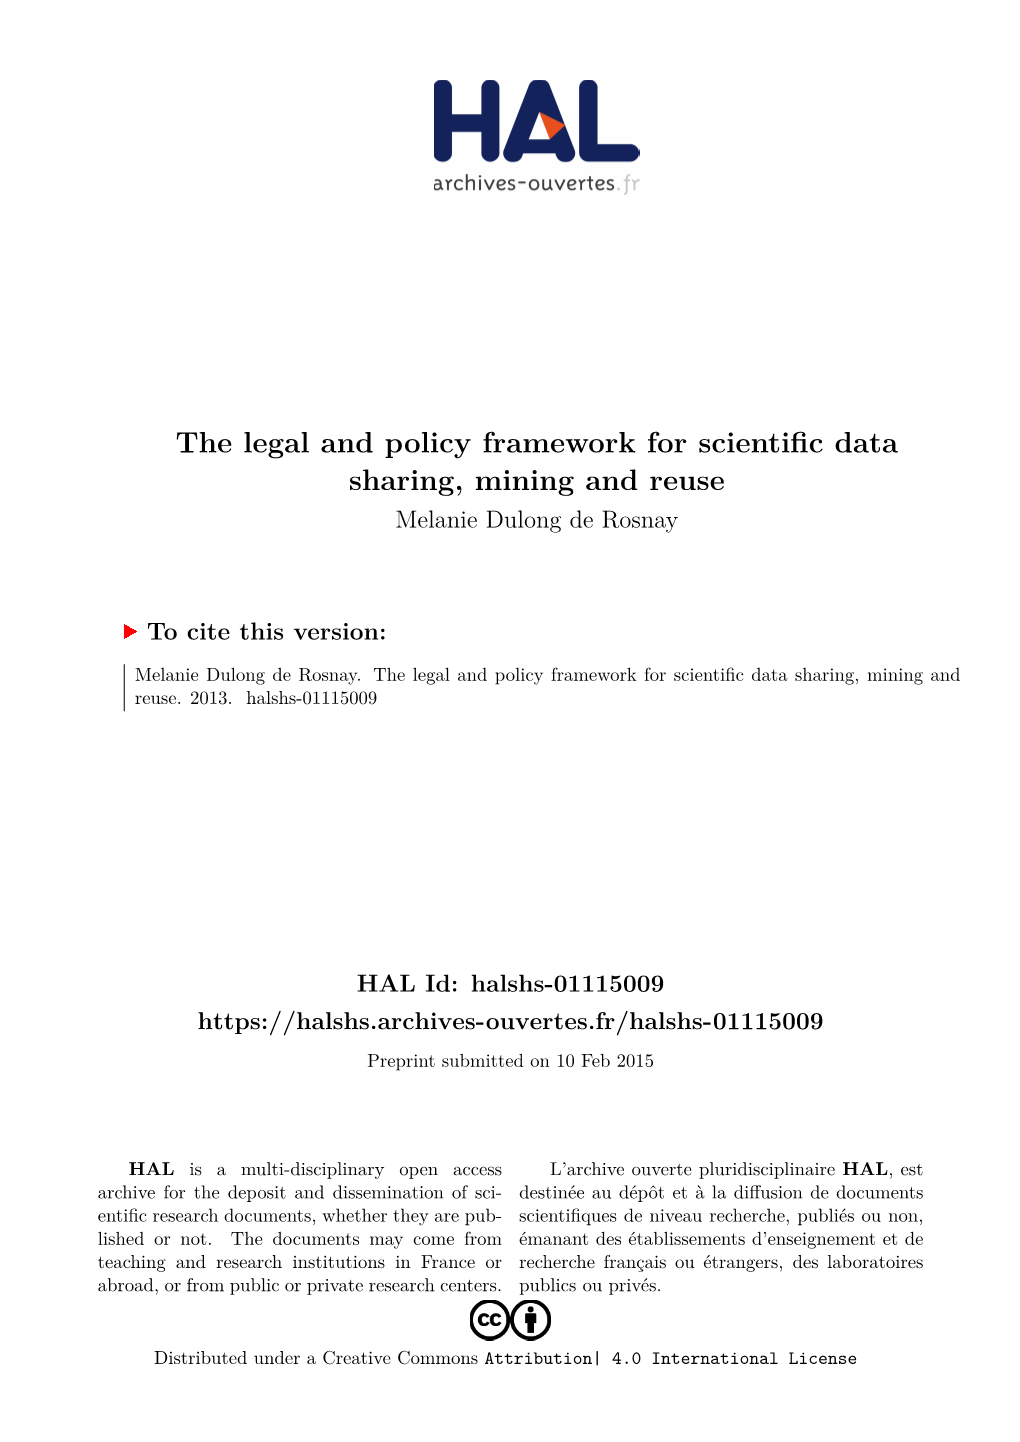 The Legal and Policy Framework for Scientific Data Sharing, Mining and Reuse Melanie Dulong De Rosnay